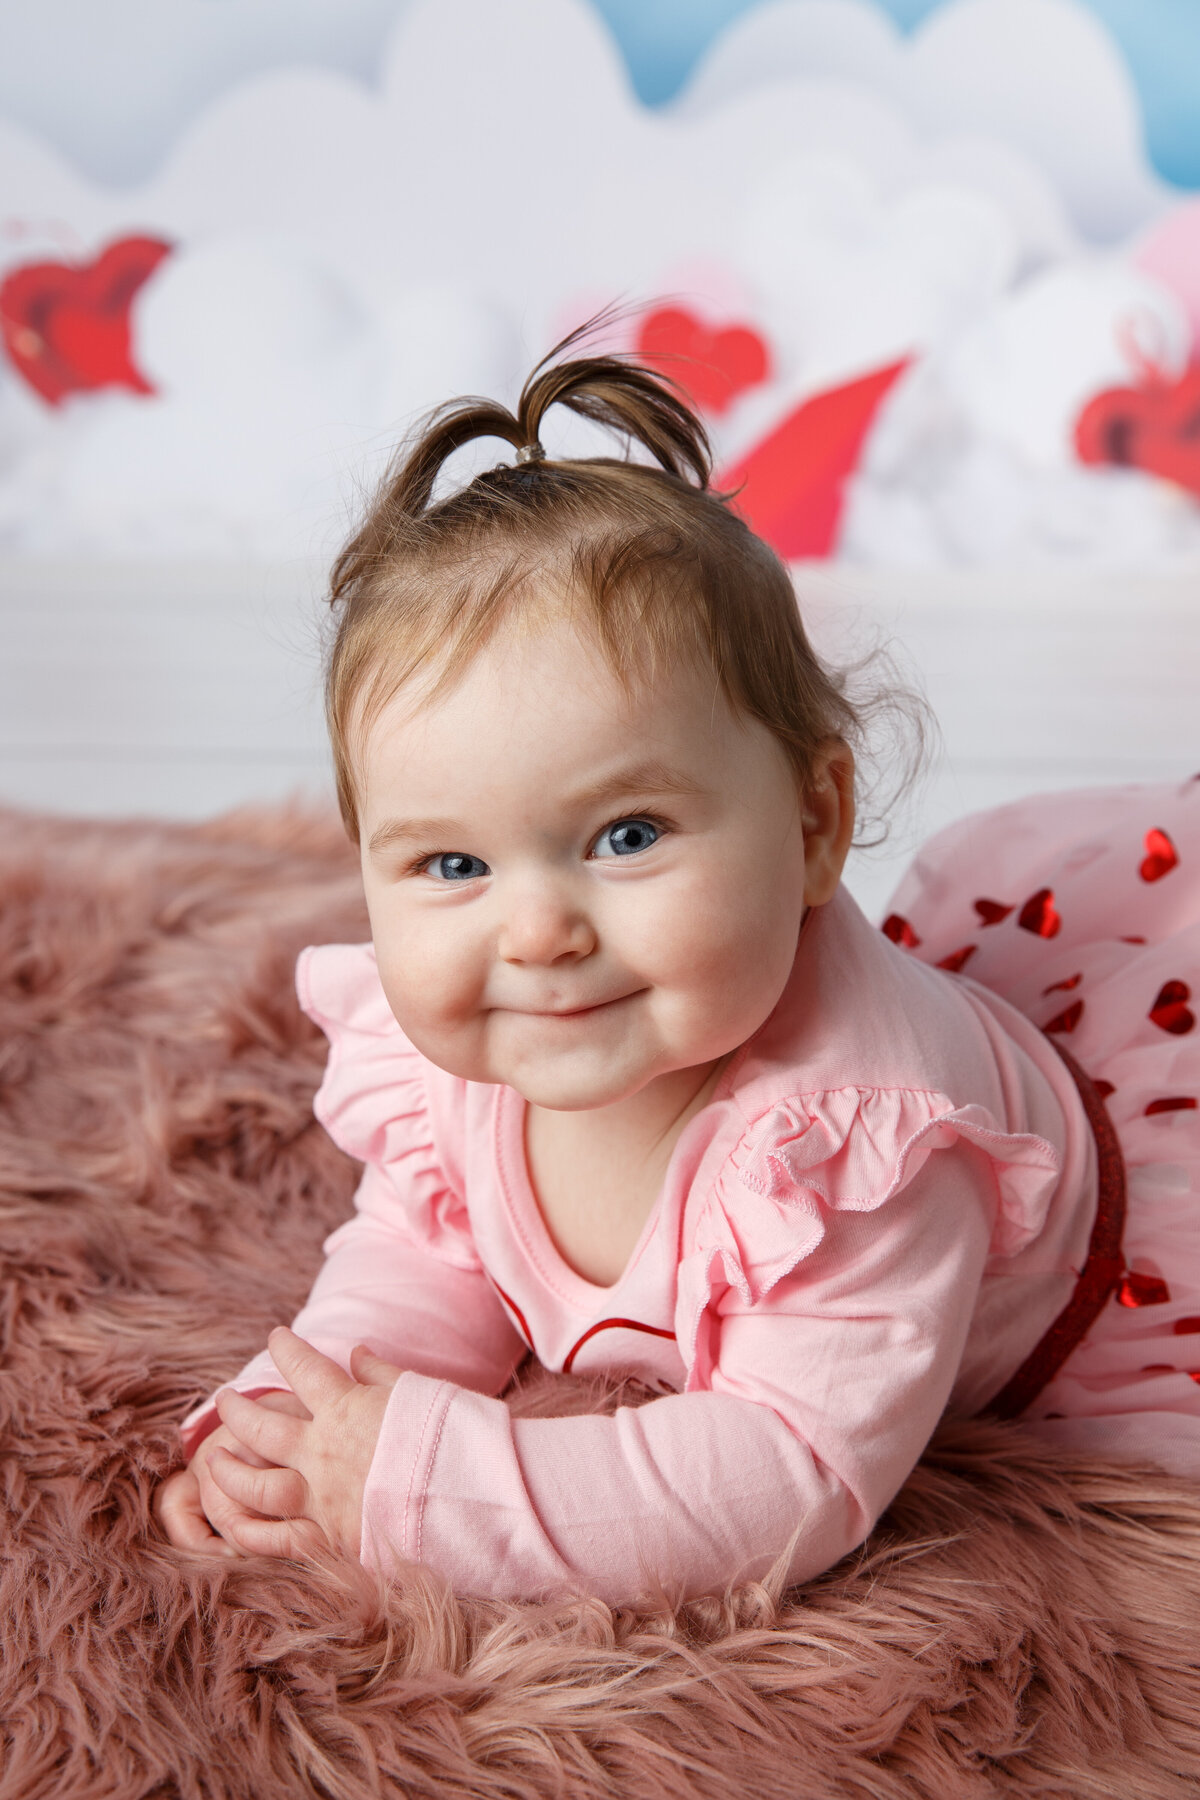 Portrait of a six month old baby girl smiling at the camera and wearing a pink shirt